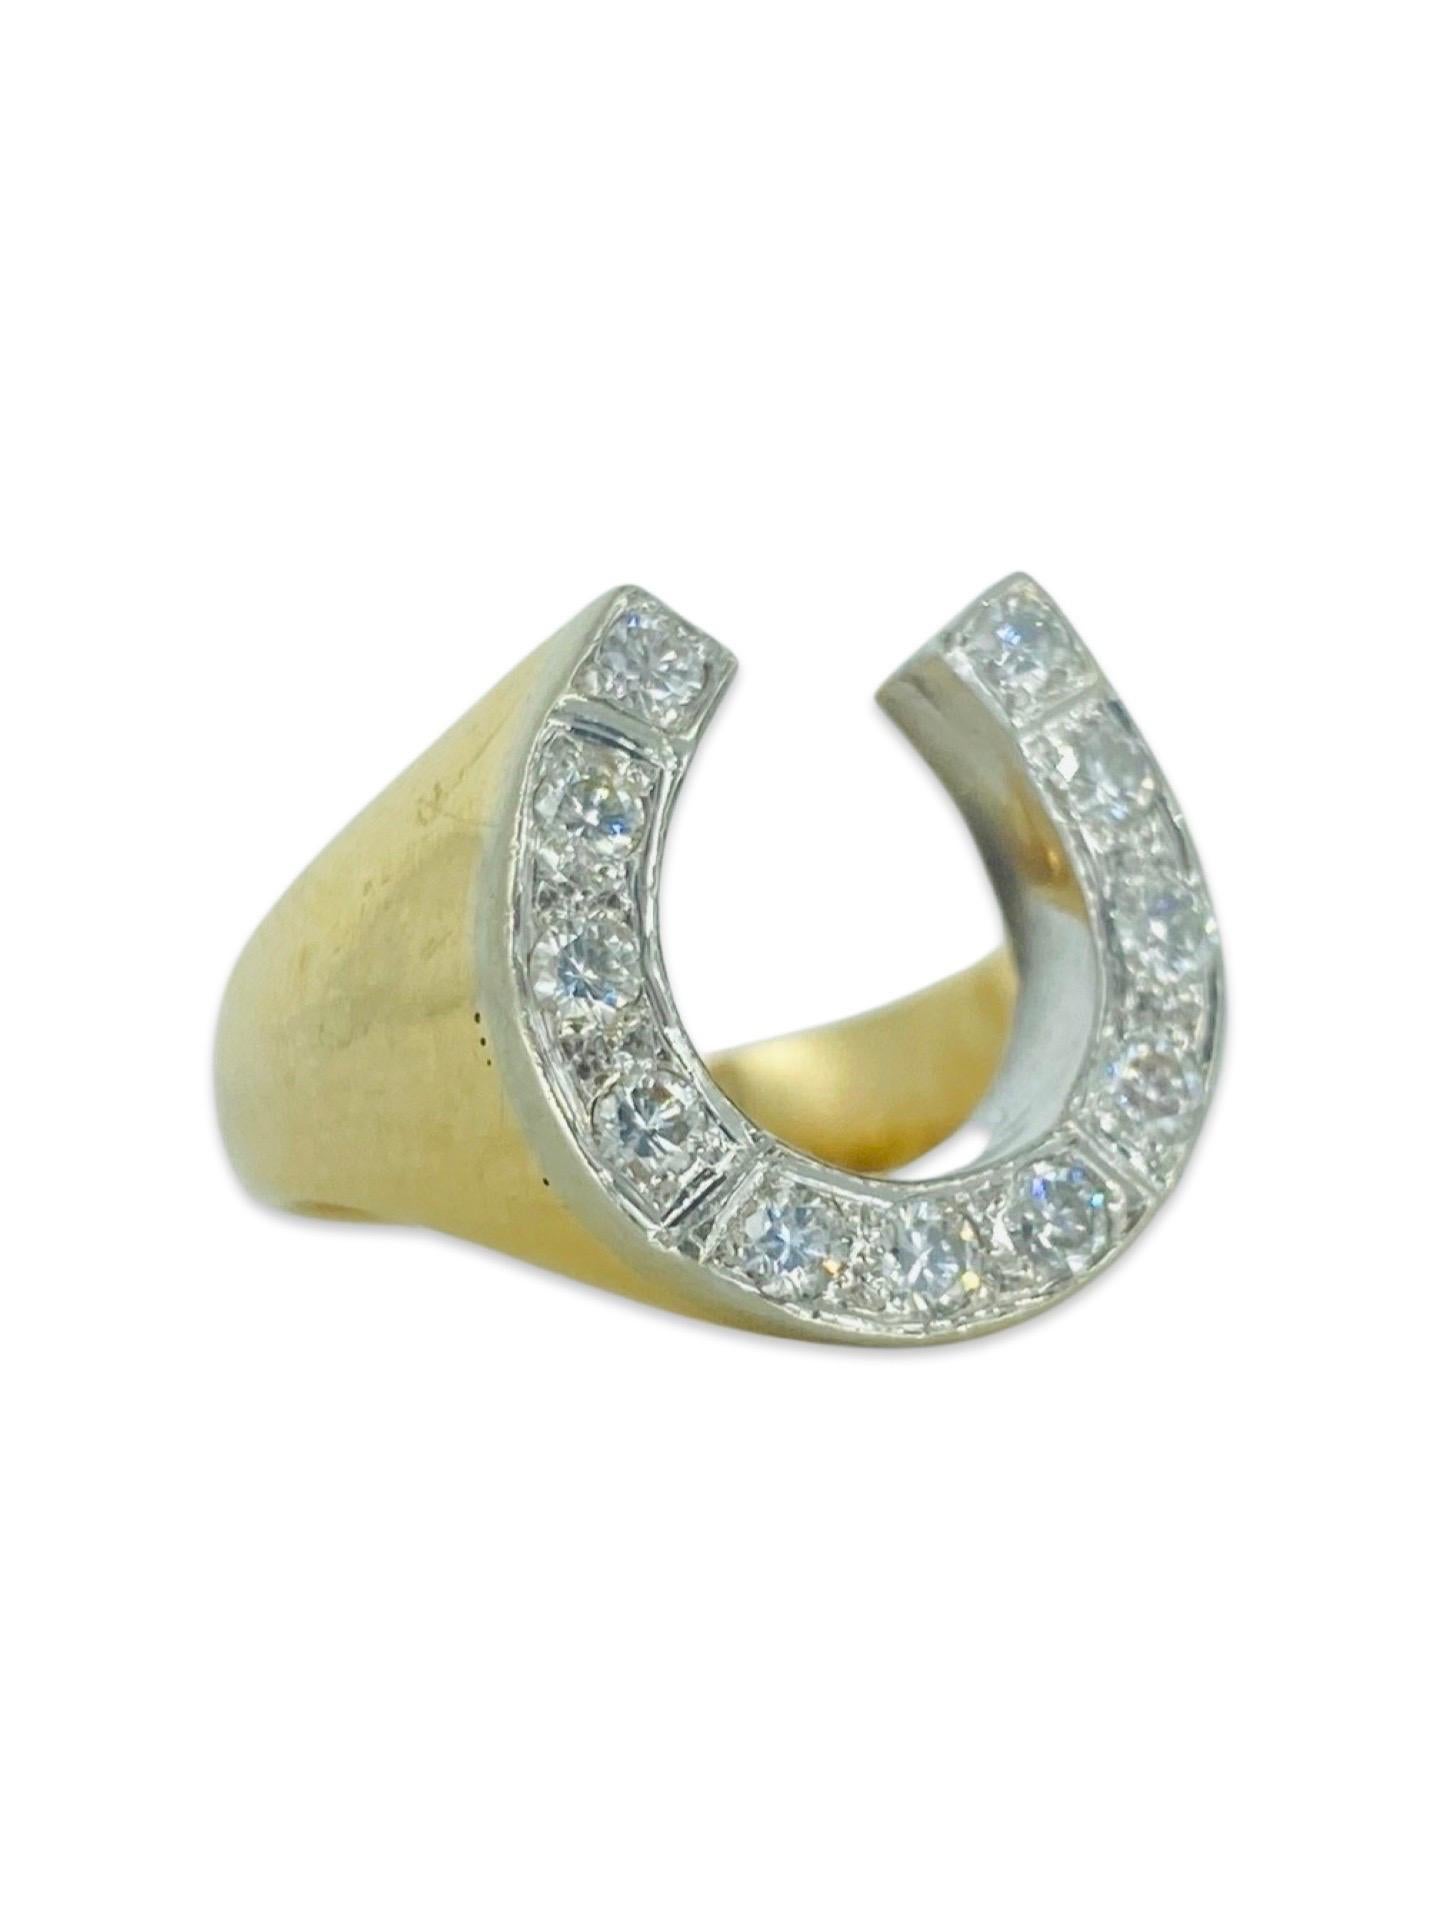 Round Cut Vintage 0.66 Carat Diamonds Lucky Horseshoe Ring 14k Gold For Sale